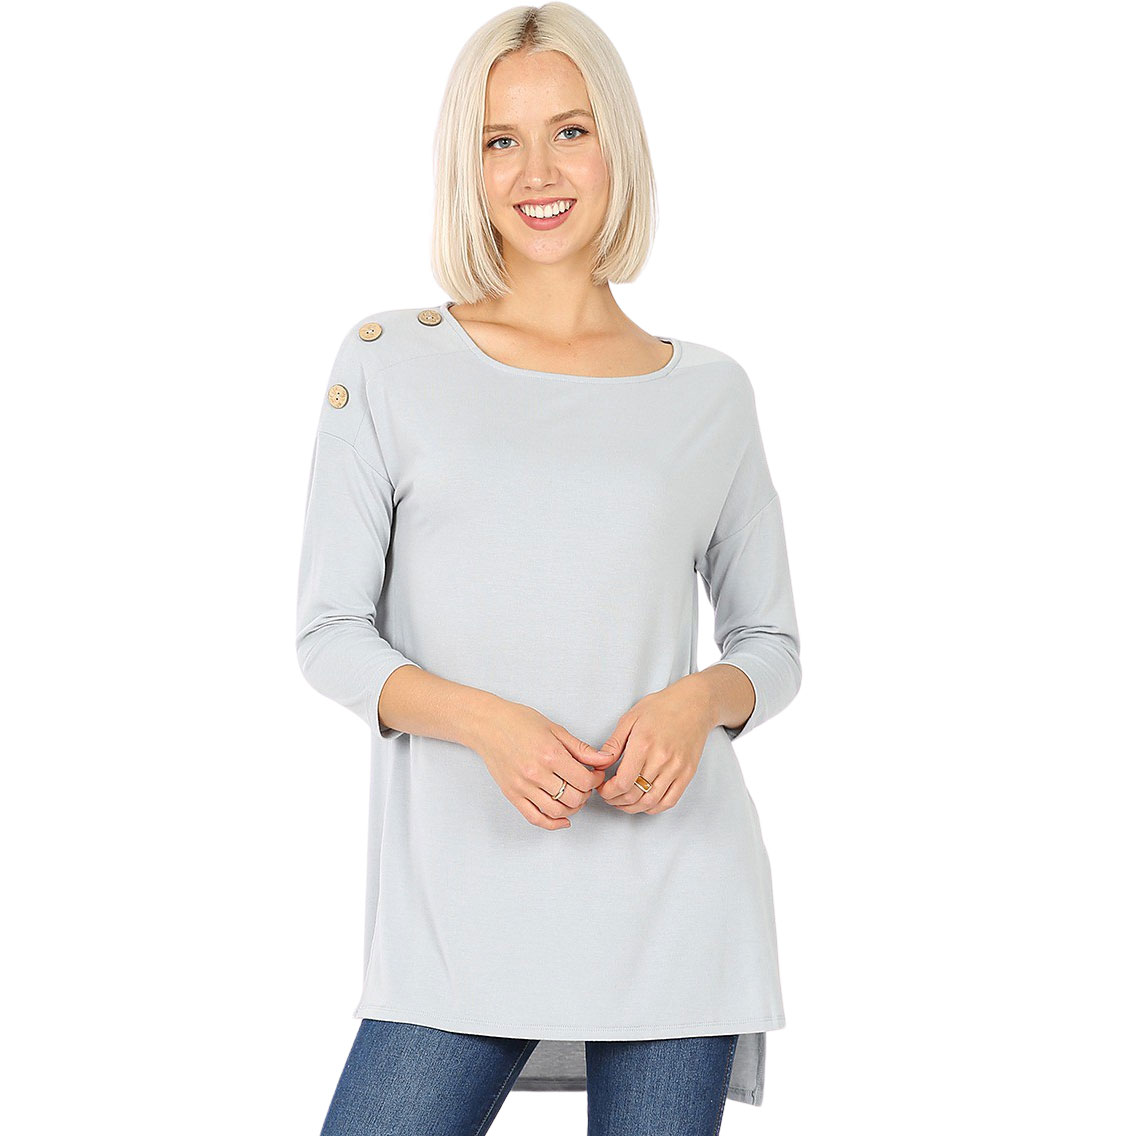 2082 - Boat Neck Hi-Lo Tops w/Wooden Buttons LIGHT GREY Boat Neck Hi-Lo Top w/ Wooden Buttons 2082 - X-Large